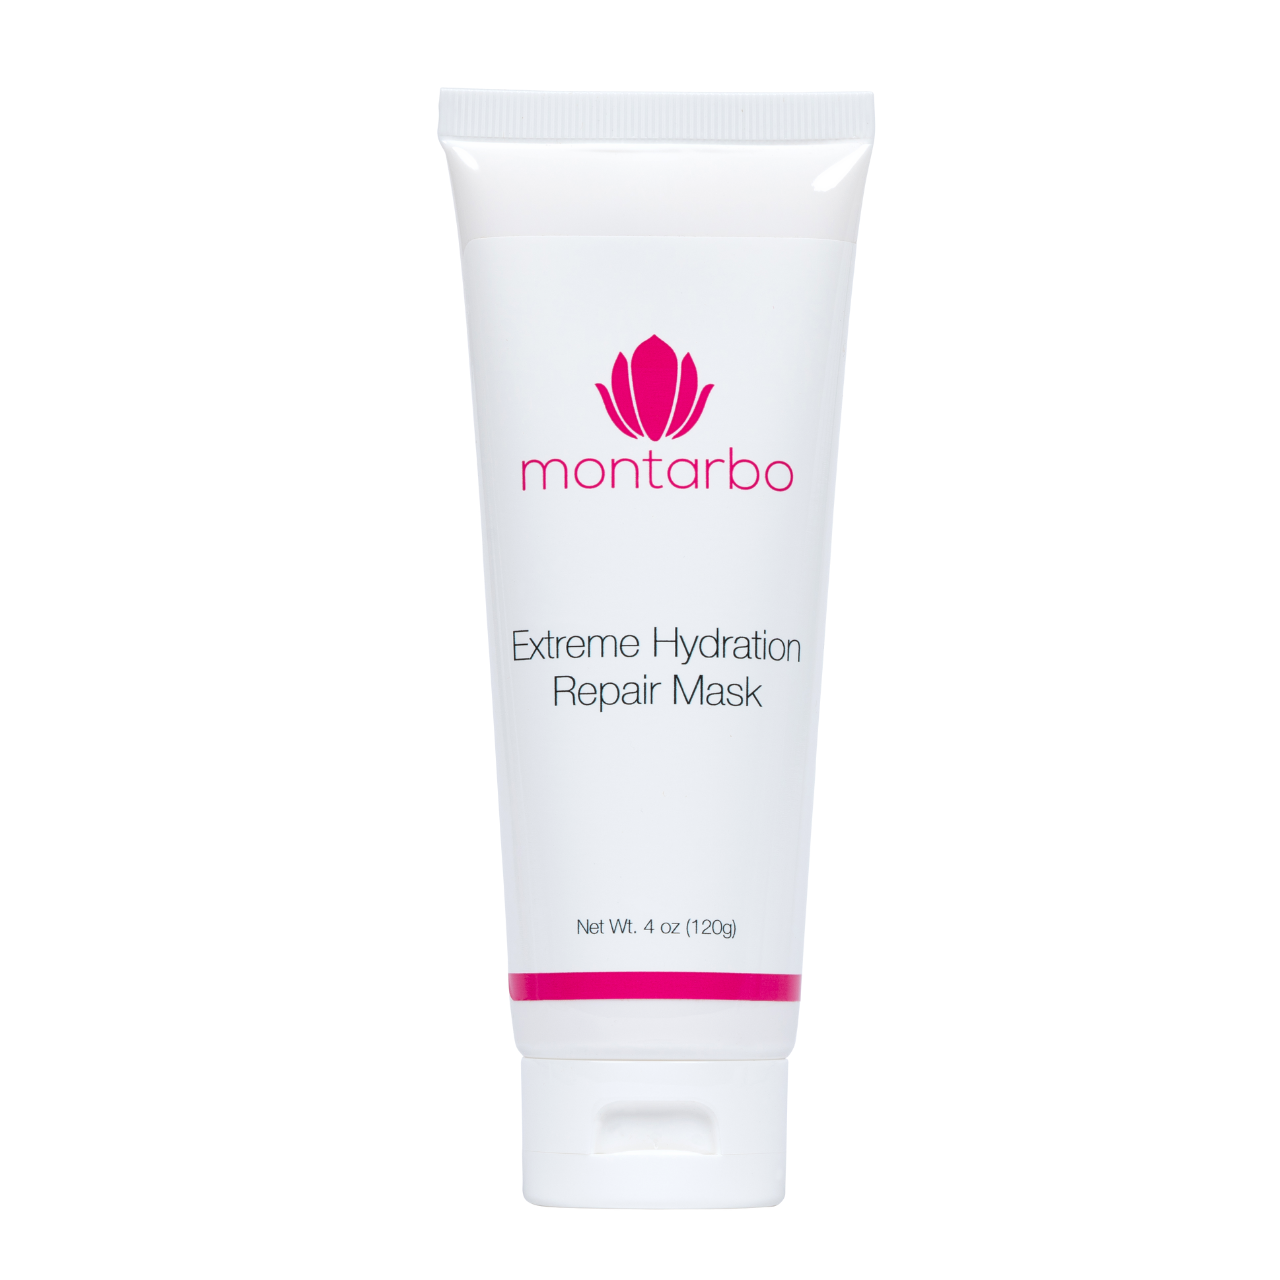 Montarbo Skincare face mask review